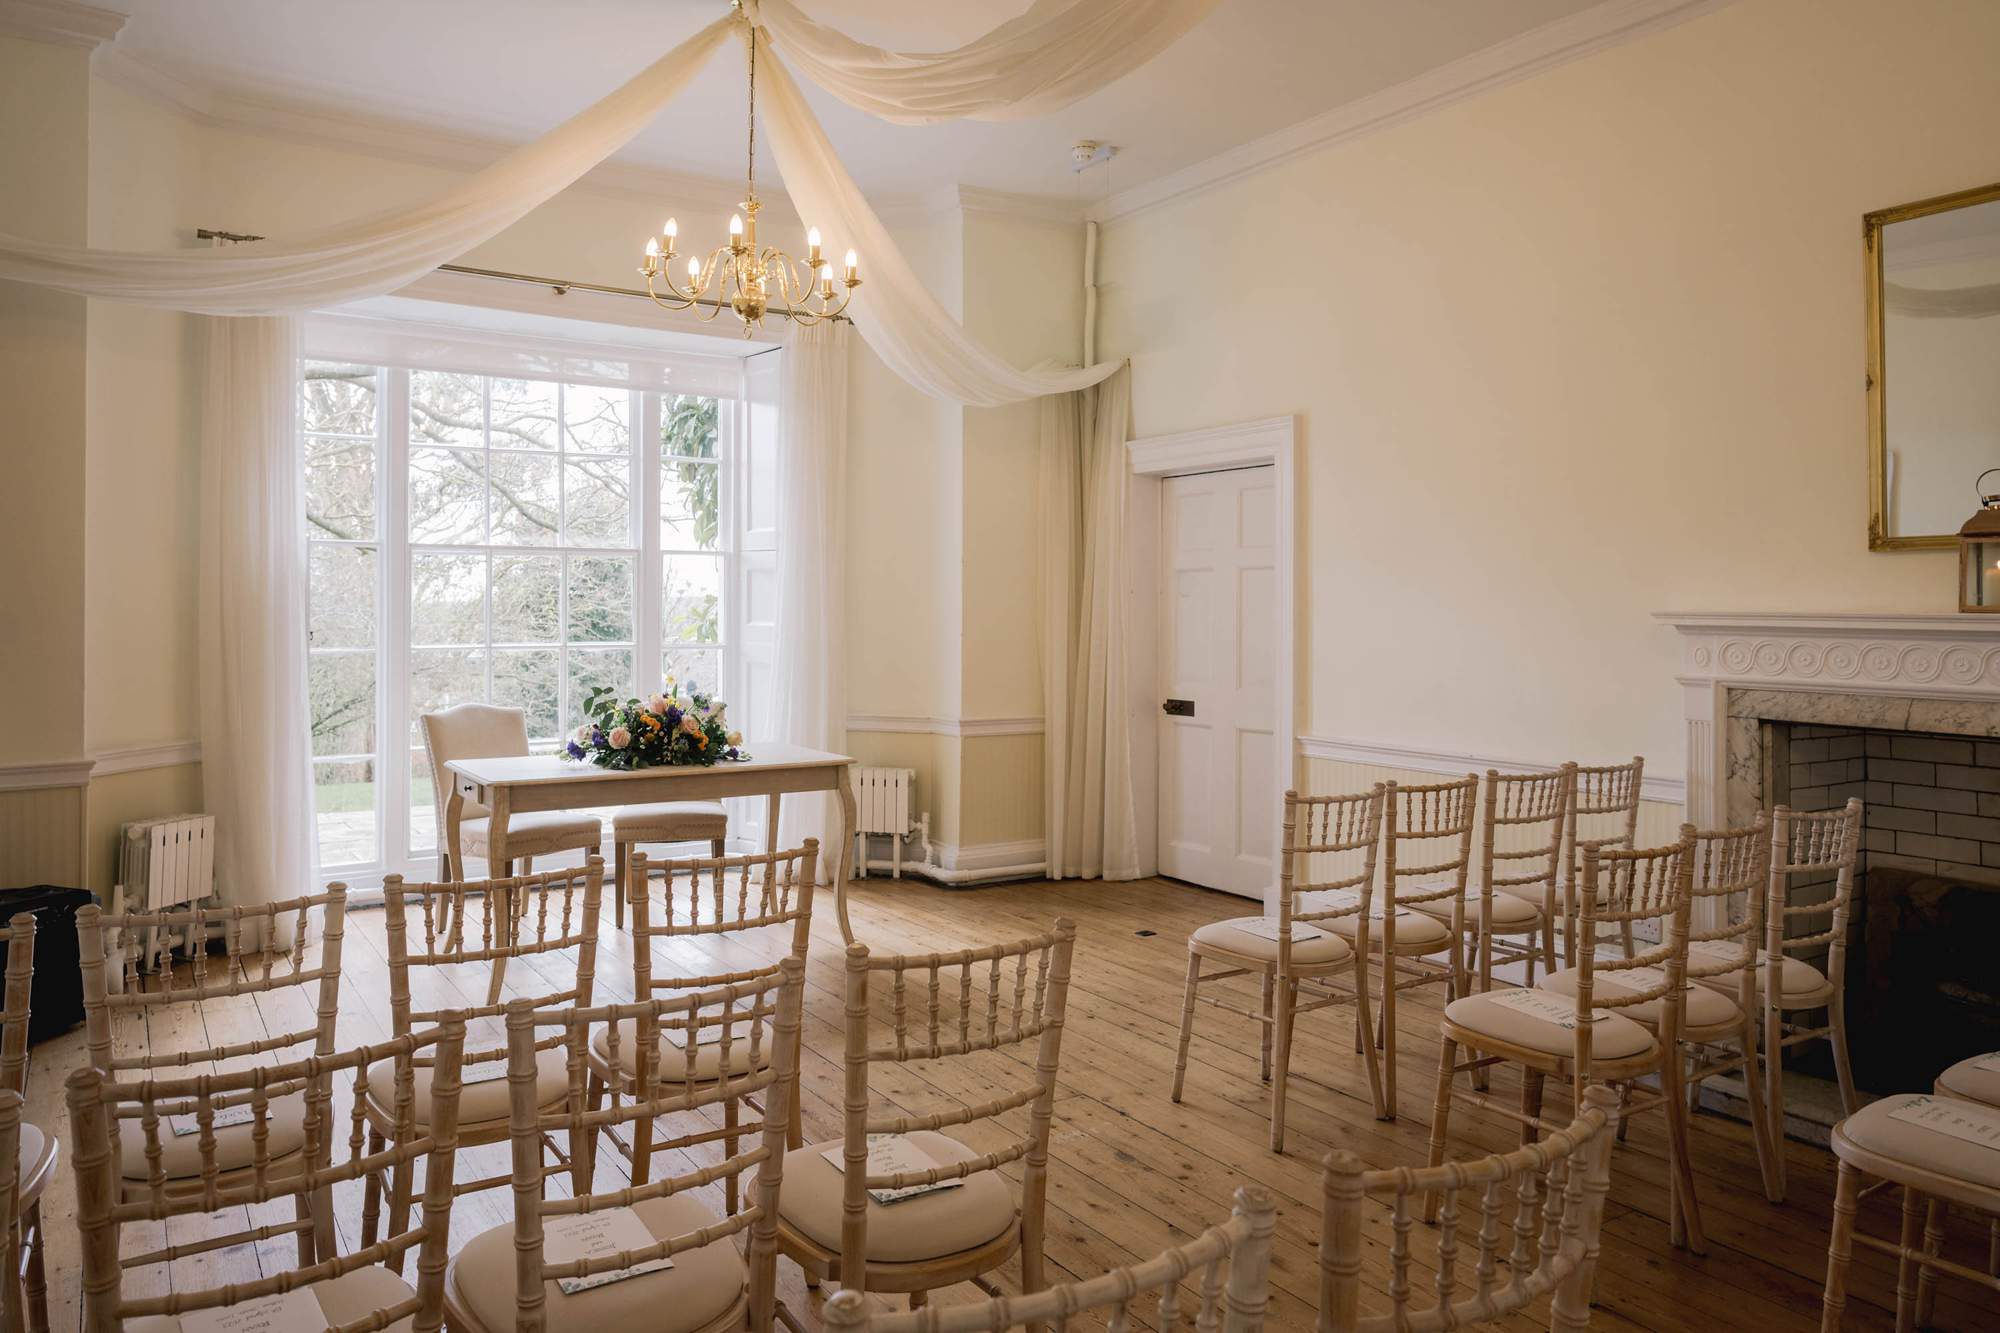 Wedding chairs ready for a ceremony at Pelham House in East Sussex.